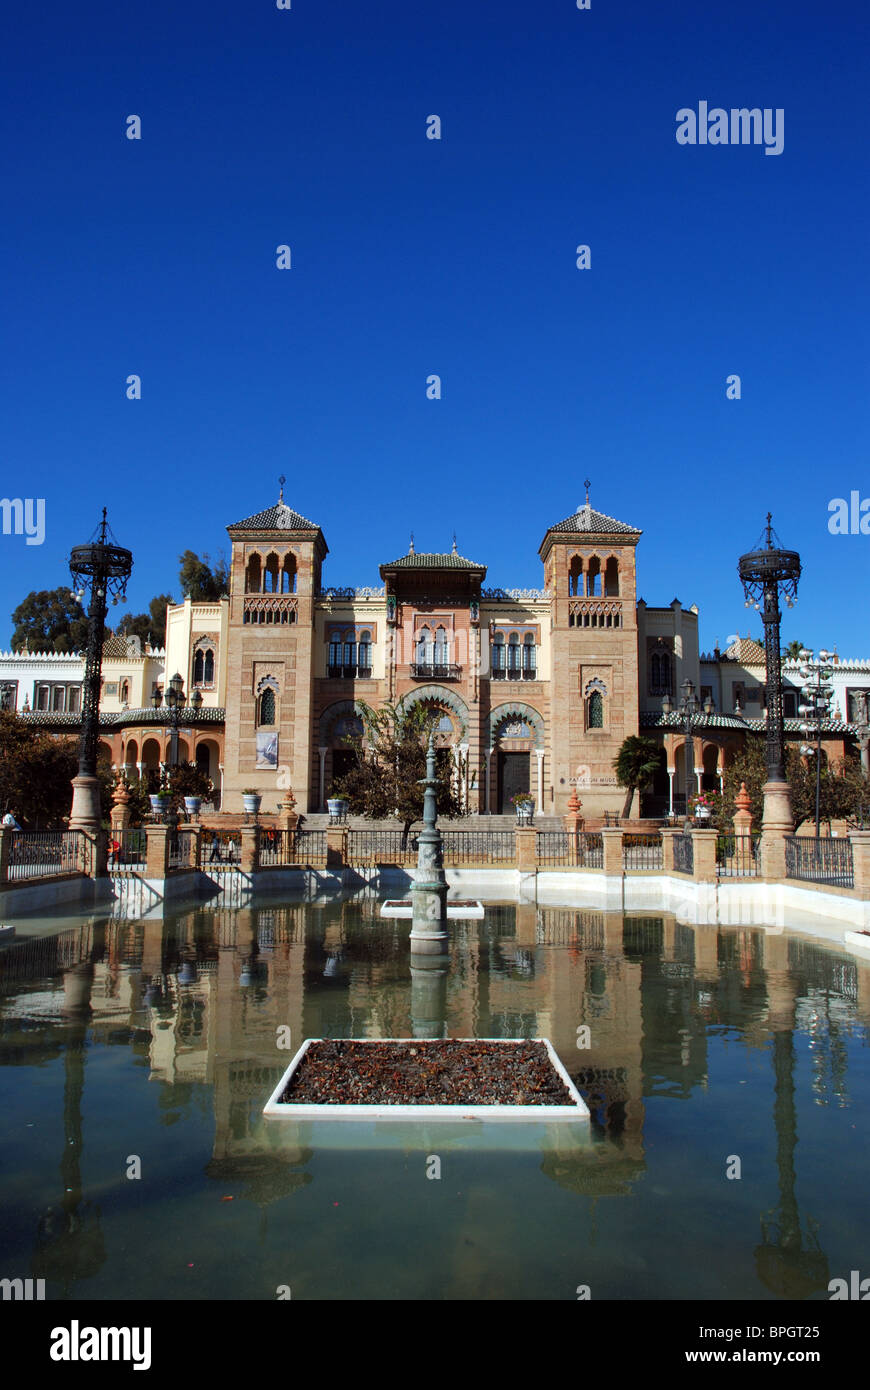 Arts and popular customs museum (Museo de Artes y Costumbres Populares), Seville, Seville Province, Andalucia, Spain. Stock Photo